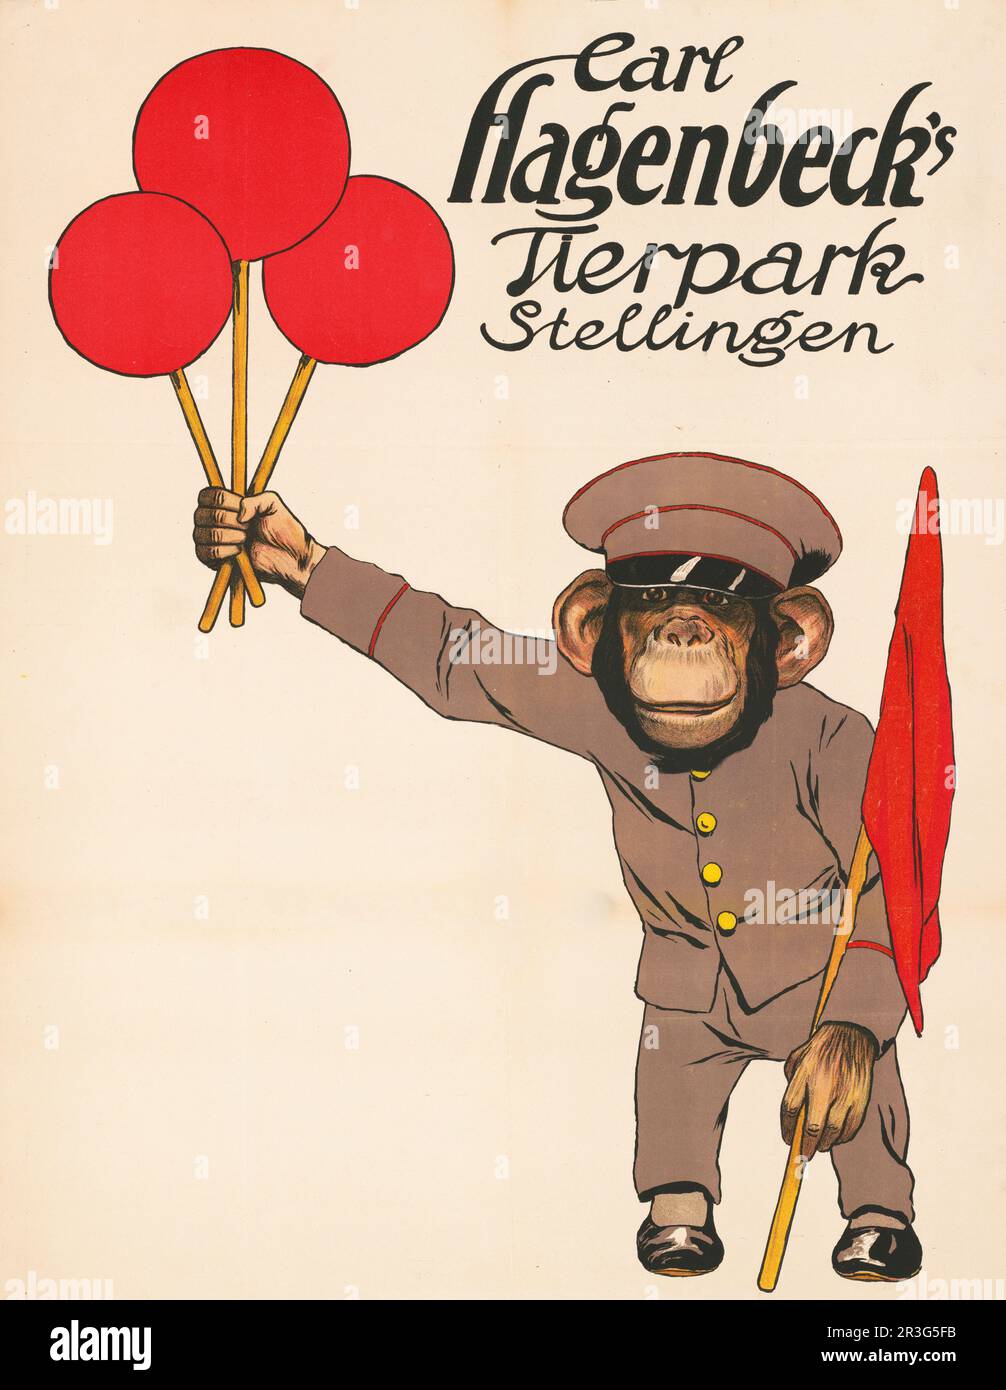 Vintage circus poster showing a monkey holding balloons. Stock Photo